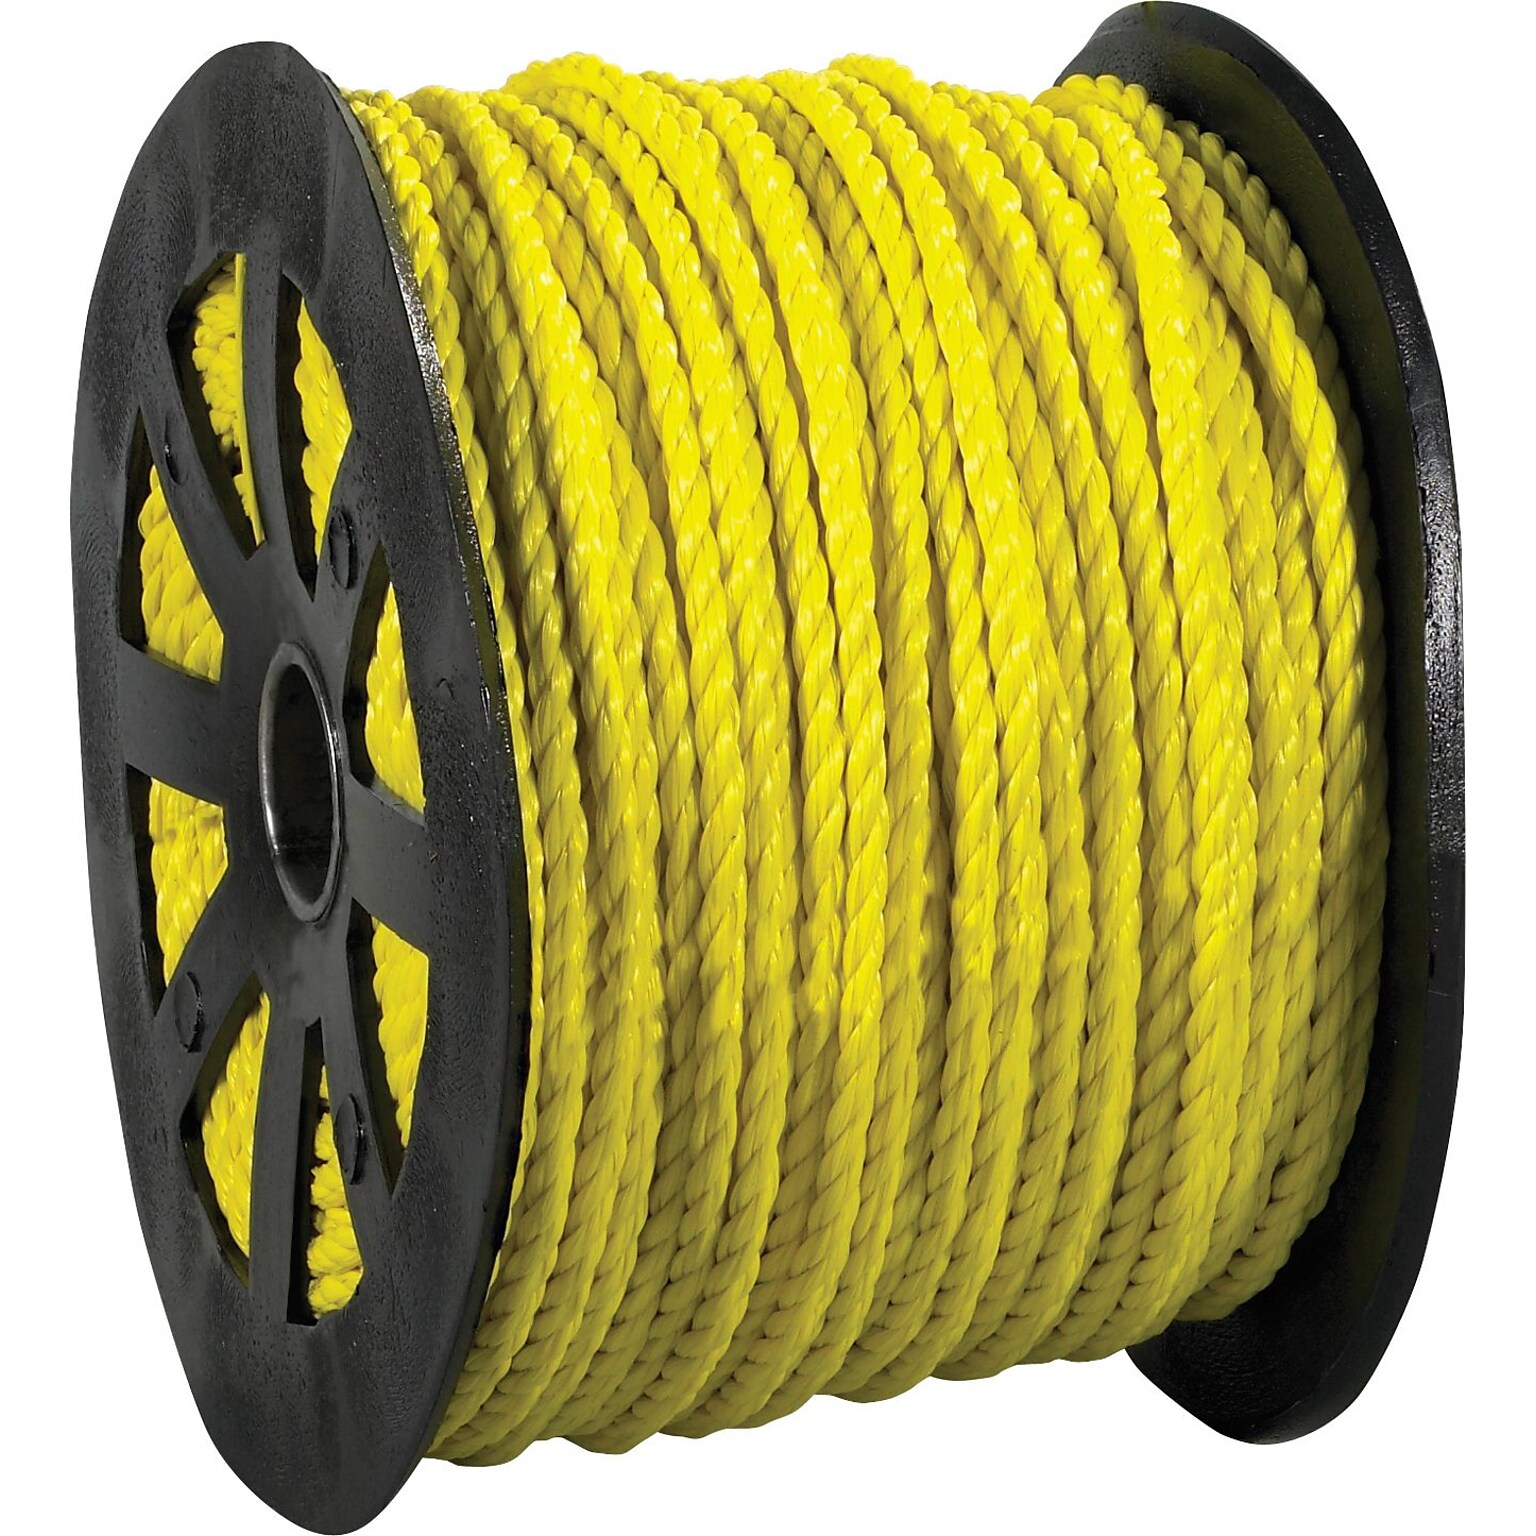 BOX Partners  1150 lbs. Twisted Polypropylene Rope, Yellow, 600